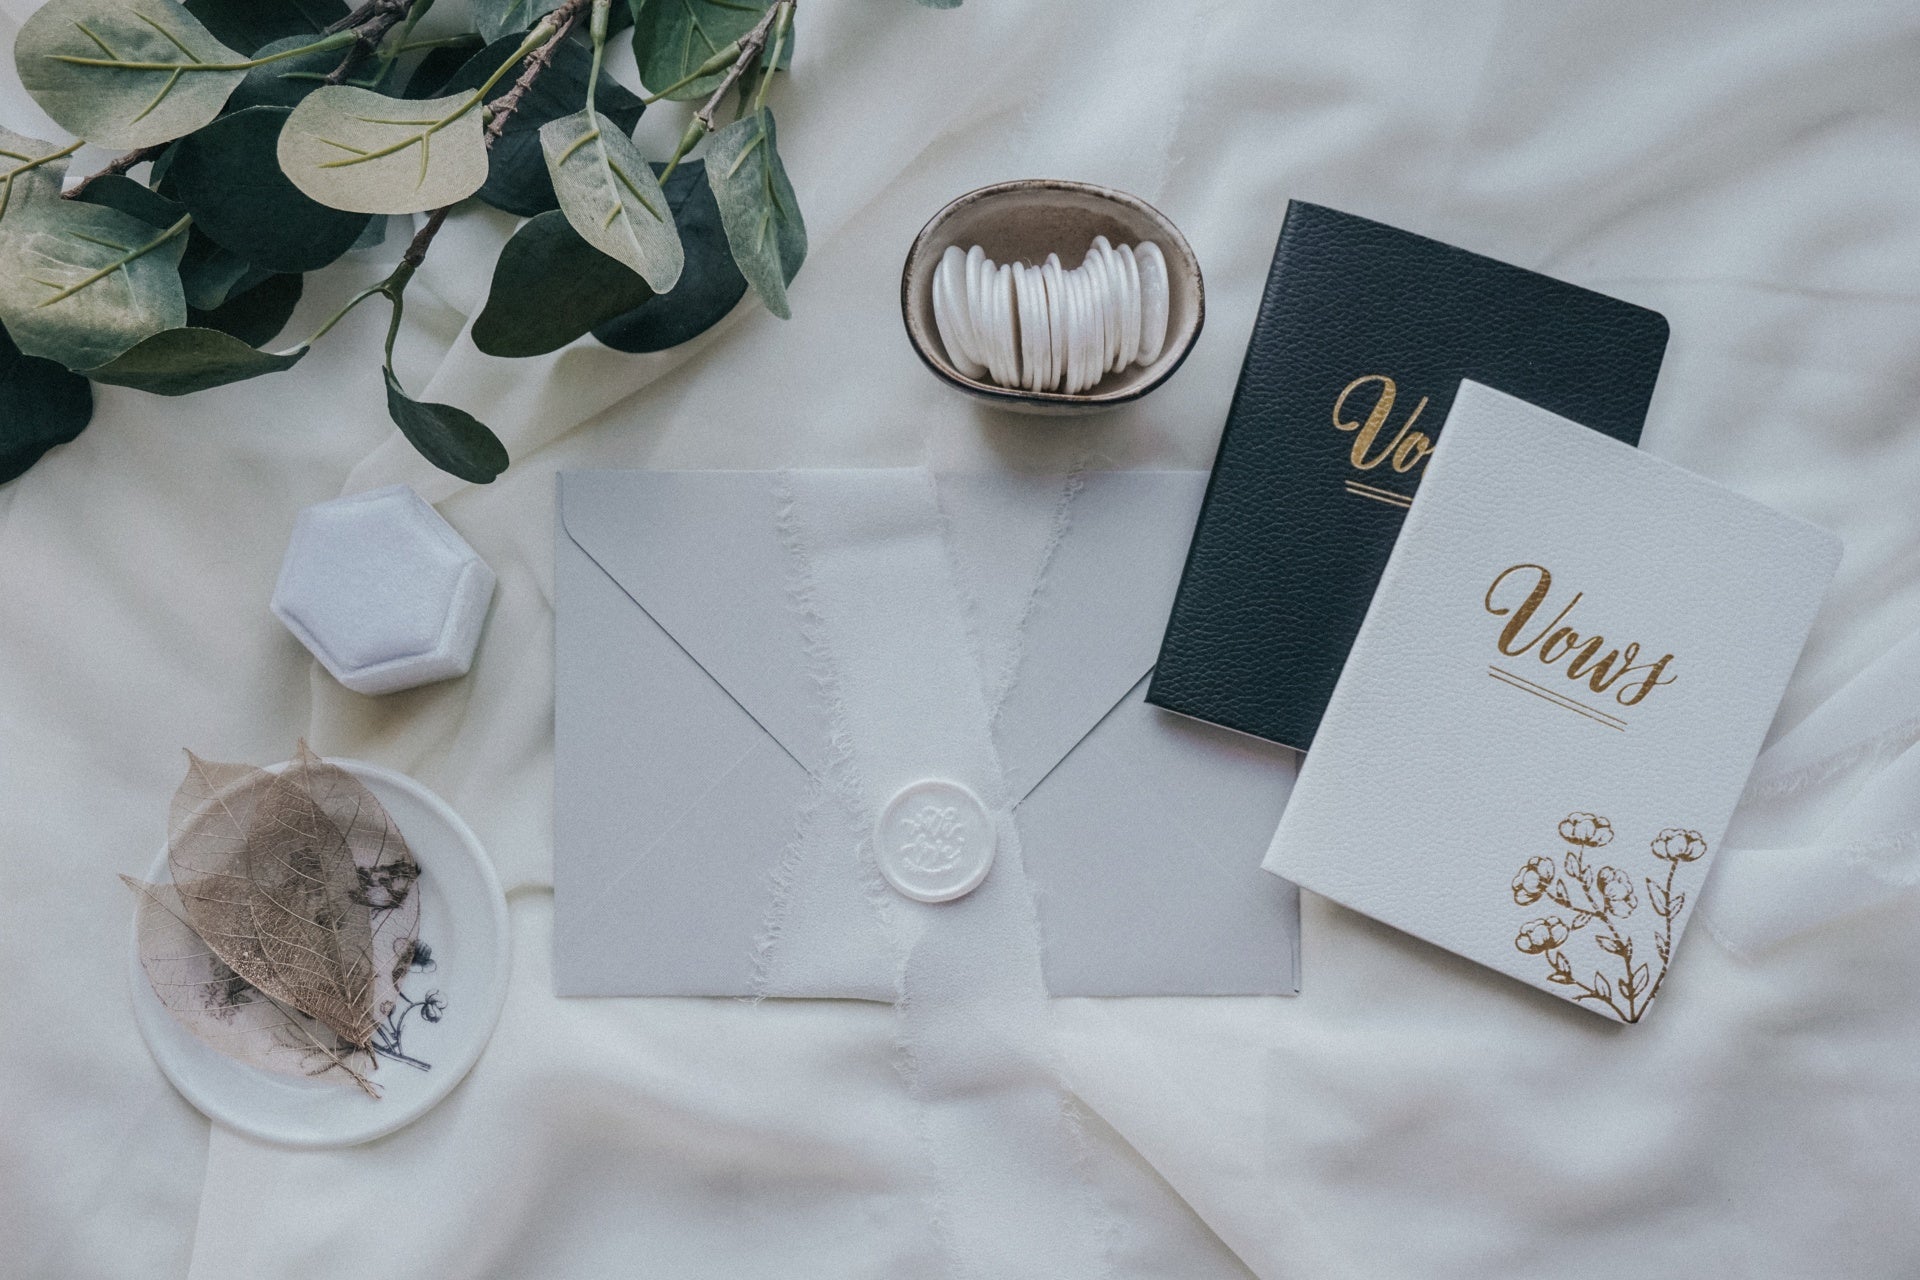 with_love-wax_seal-Dove_white-wax_seals_in_bowl-envelope-wedding_items_and_botanical_flatlay-background_1 - Made of Honour Co.